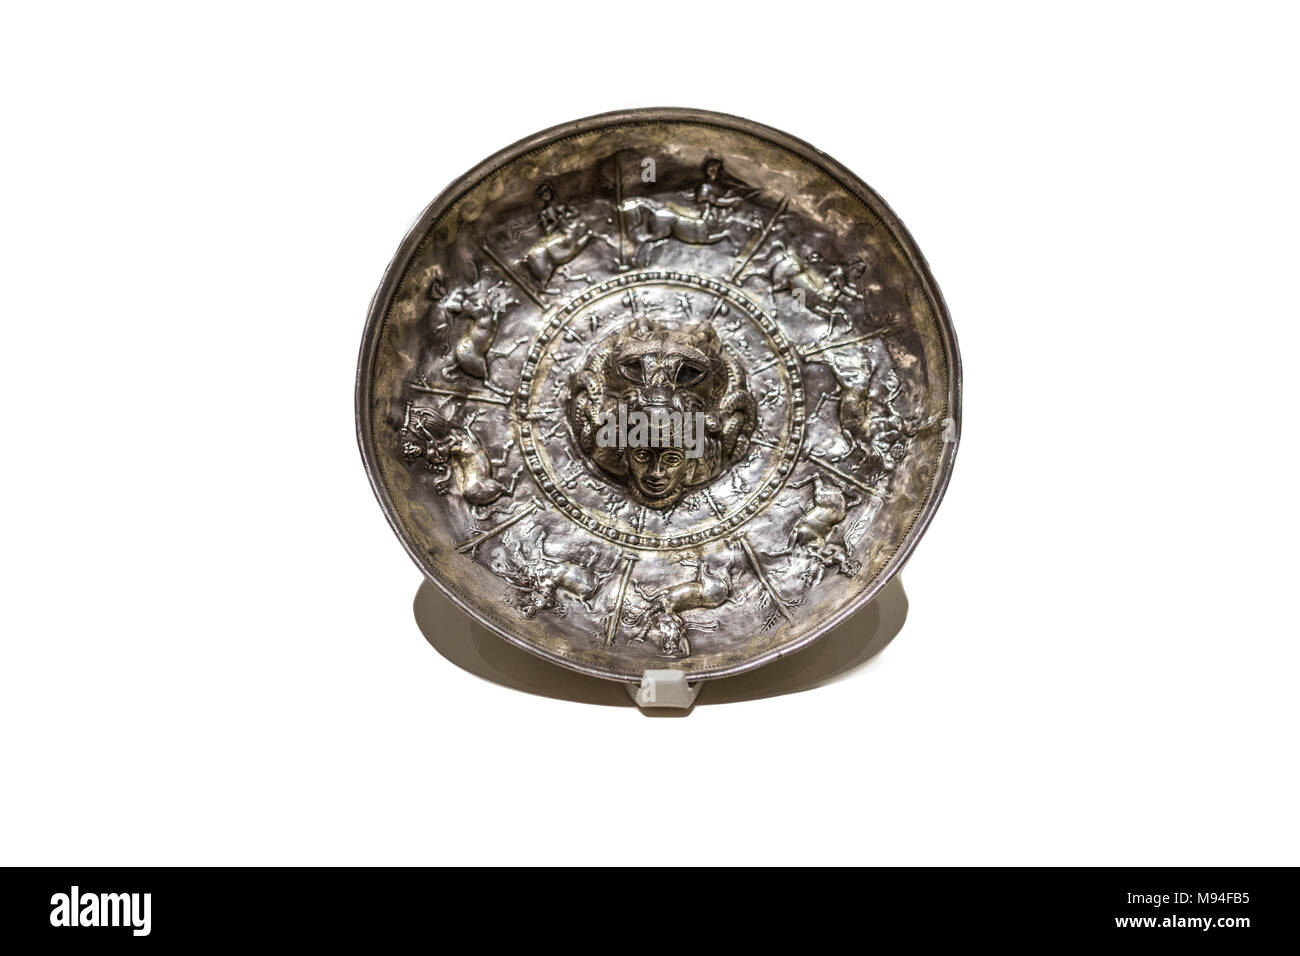 Madrid, Spain - November 10, 2017: Patera for libations from Iberian Culture made of gilded silver. National Archaeological Museum Stock Photo